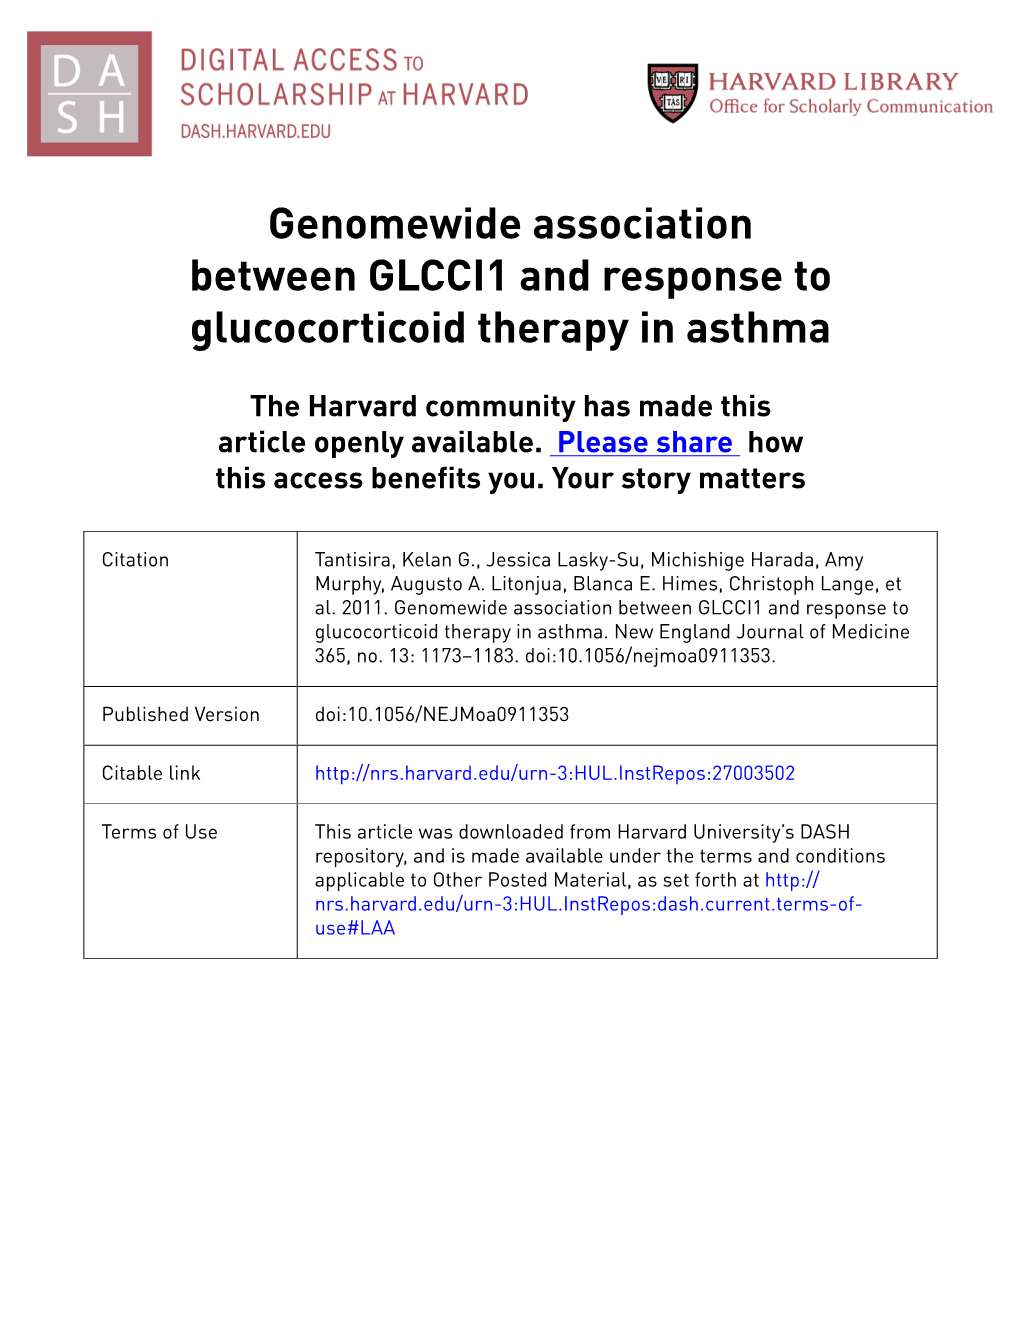 Genomewide Association Between GLCCI1 and Response to Glucocorticoid Therapy in Asthma